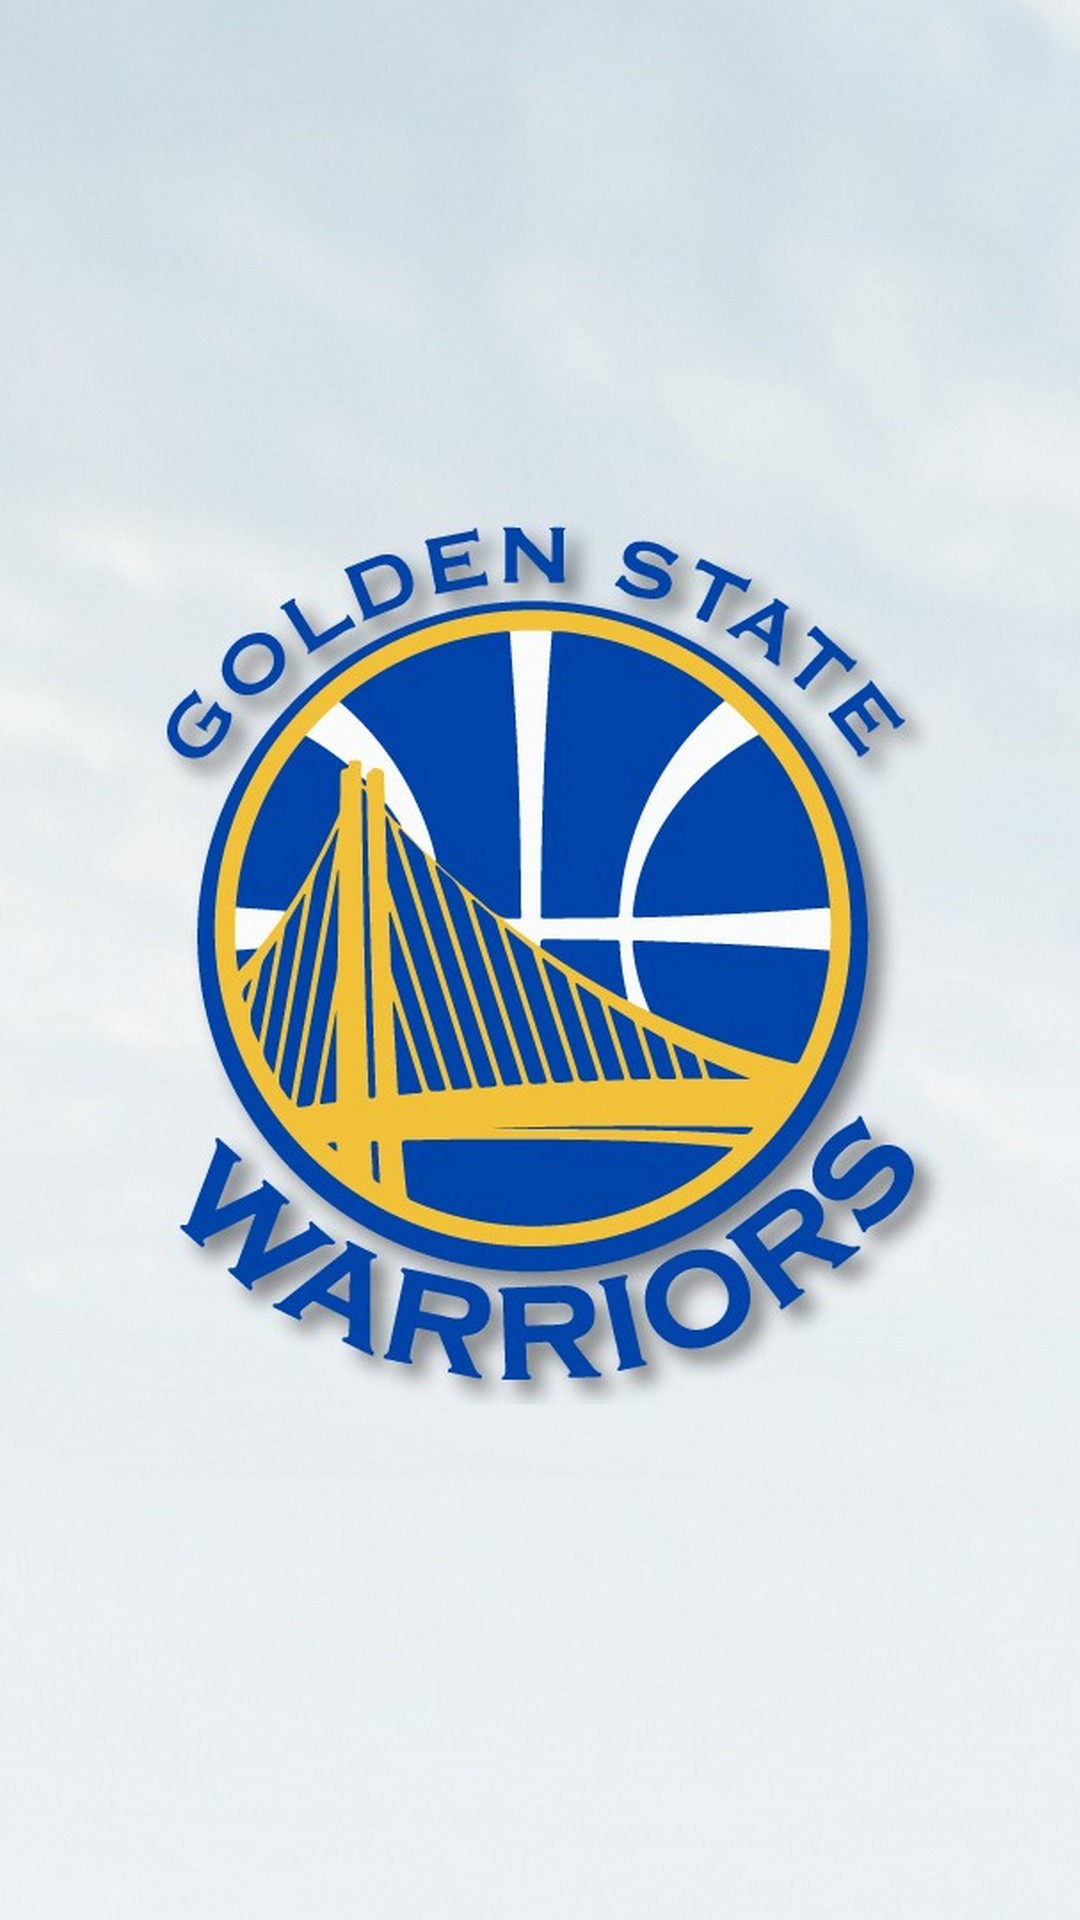 Golden State Warriors iPhone X Wallpaper with image resolution 1080x1920 pixel. You can use this wallpaper as background for your desktop Computer Screensavers, Android or iPhone smartphones